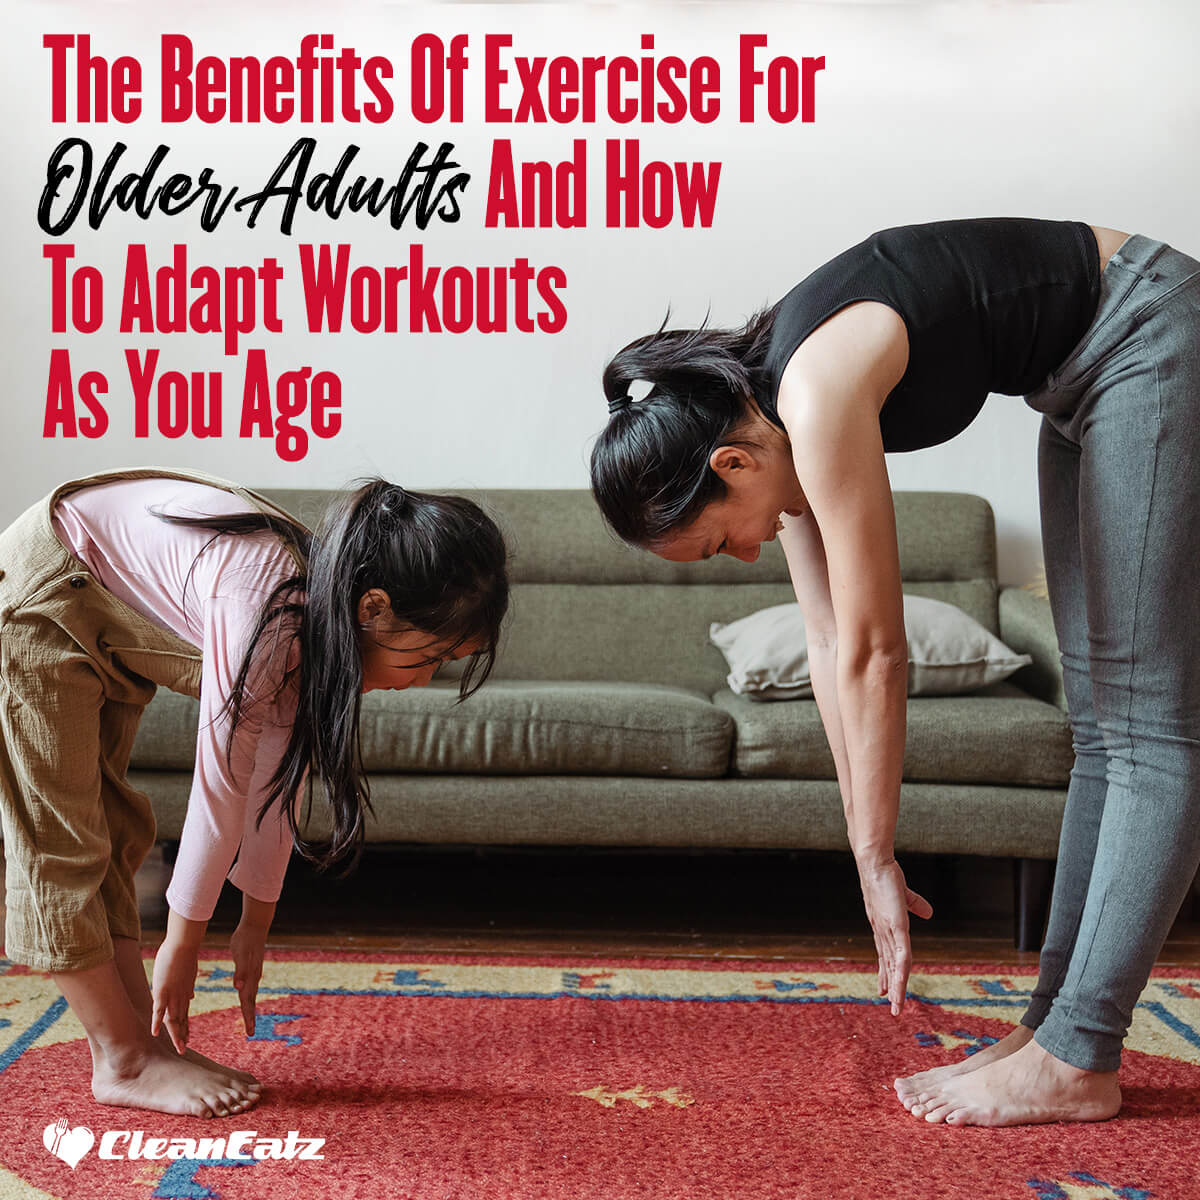 The Benefits of Exercise for Older Adults and How To Adapt